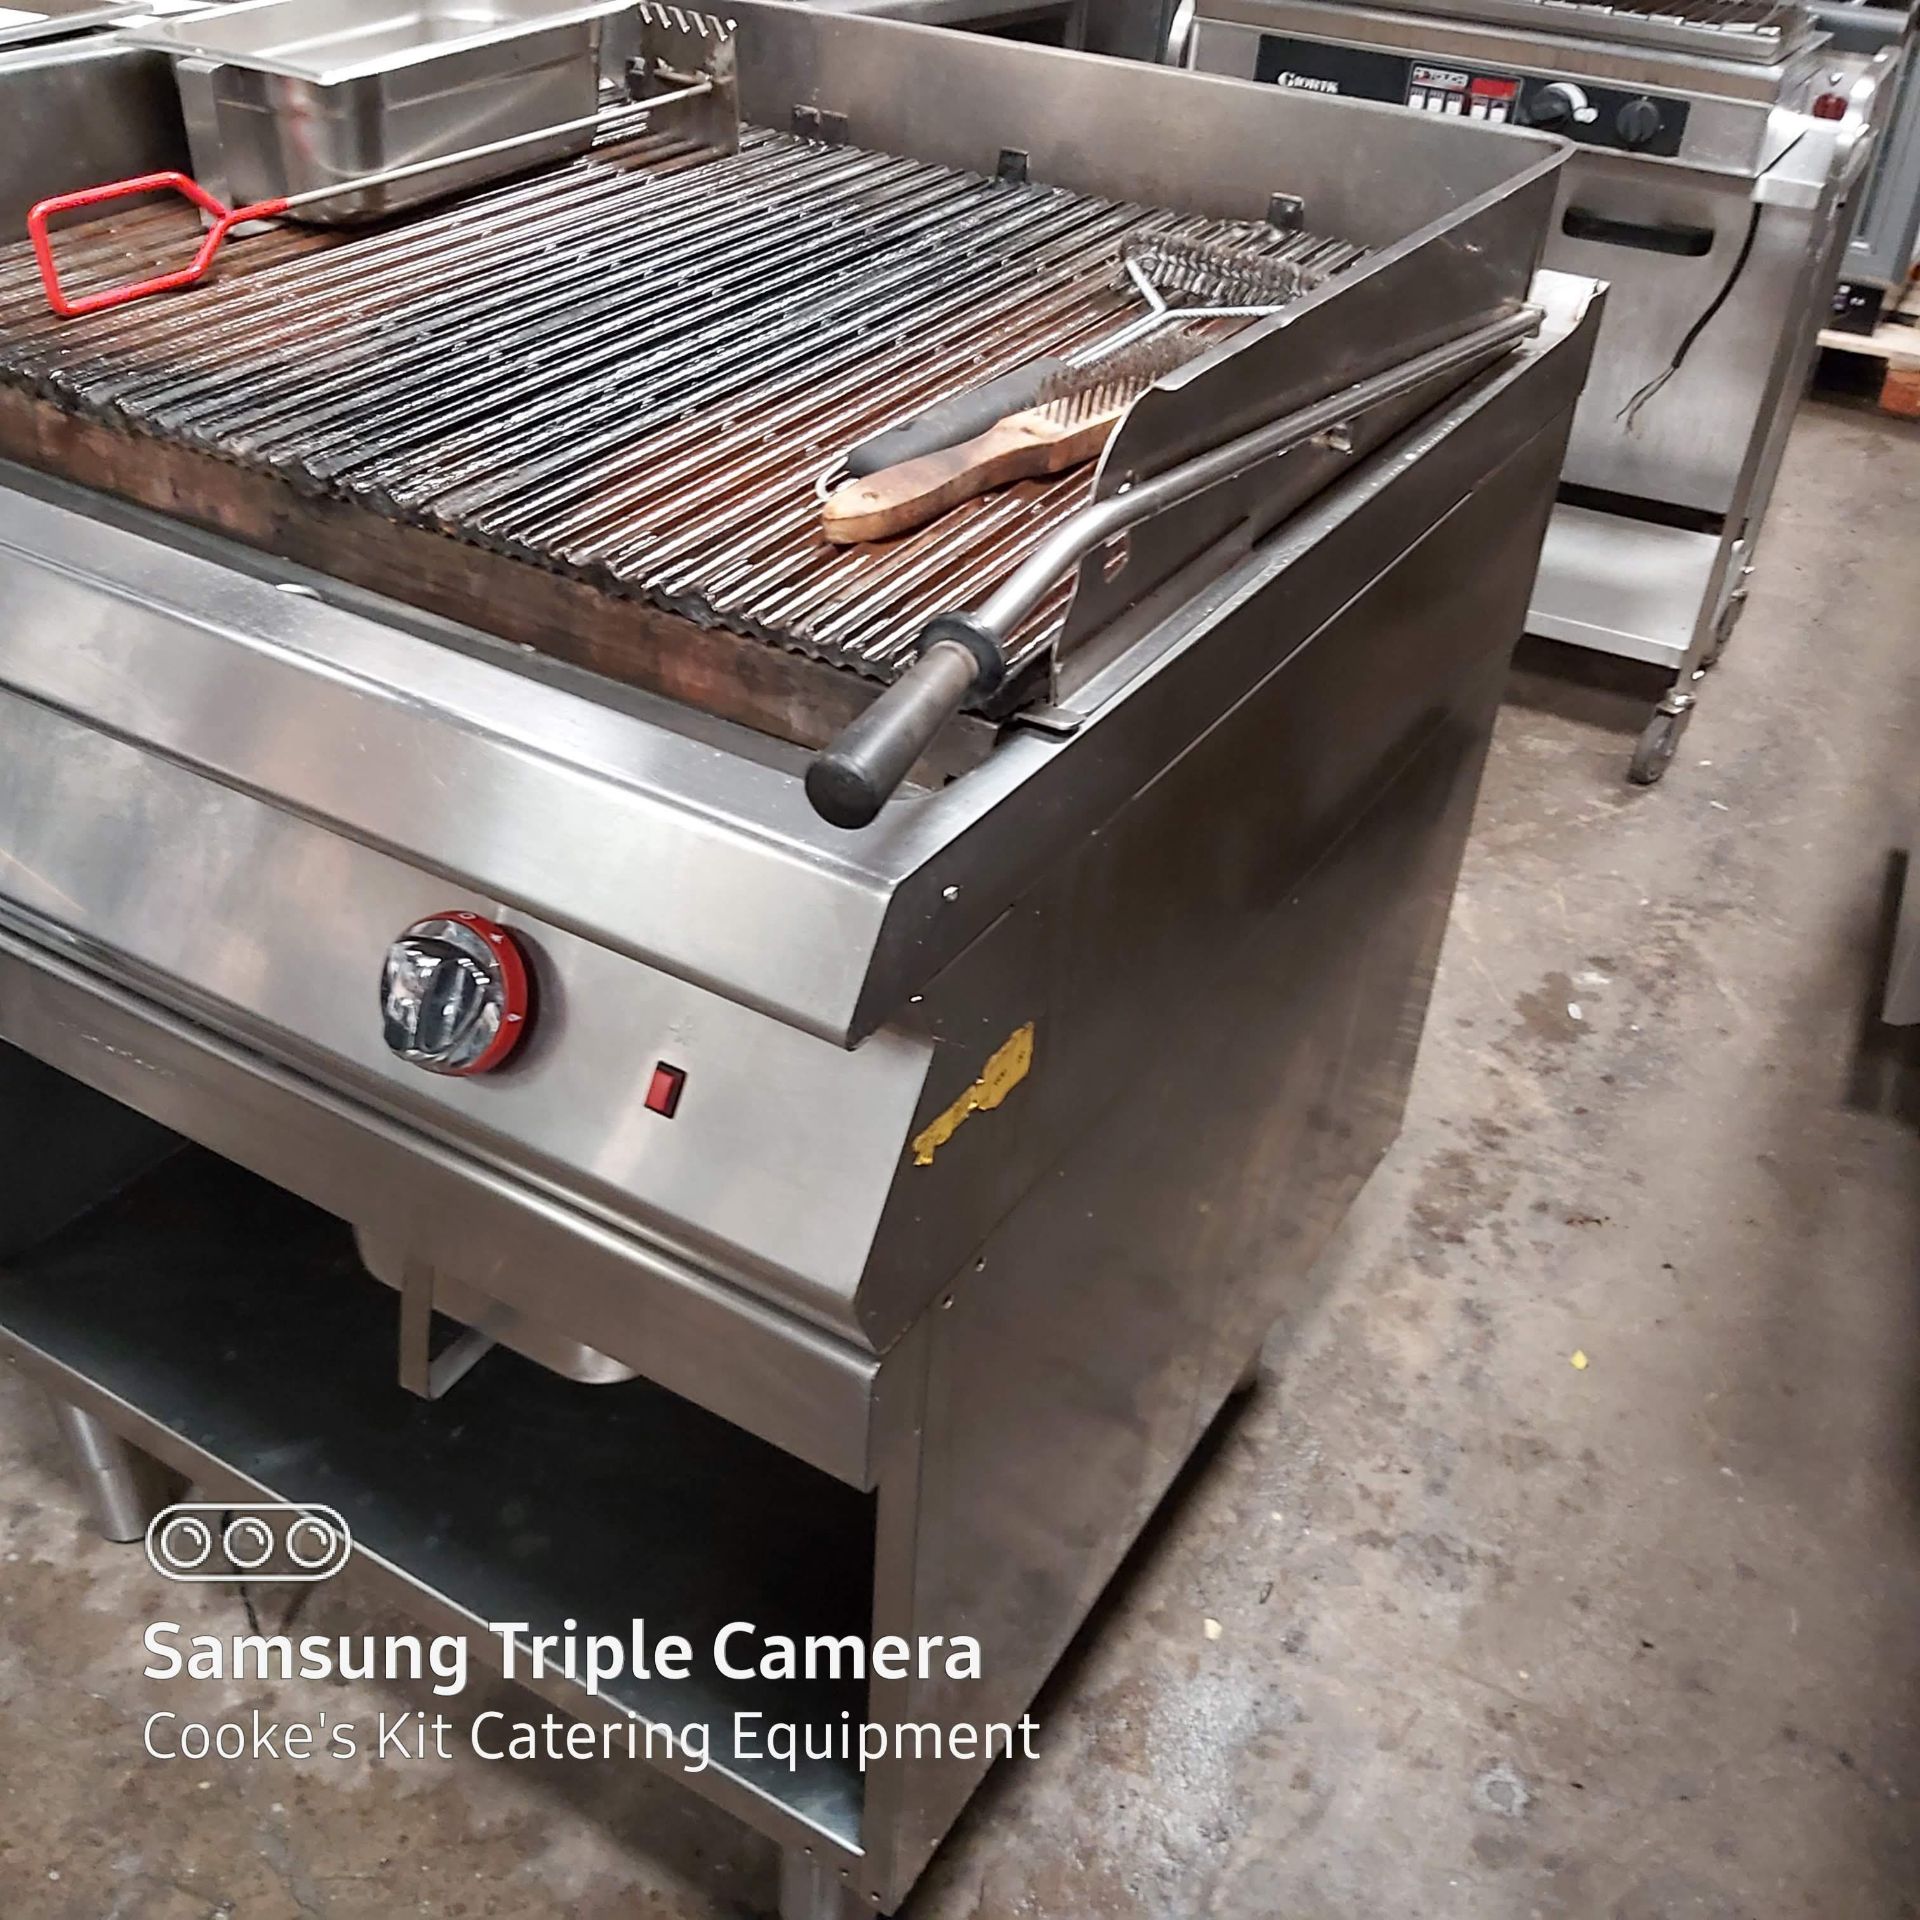 ANGELO PO 190GRG Natural Gas Chargrill - Image 4 of 4